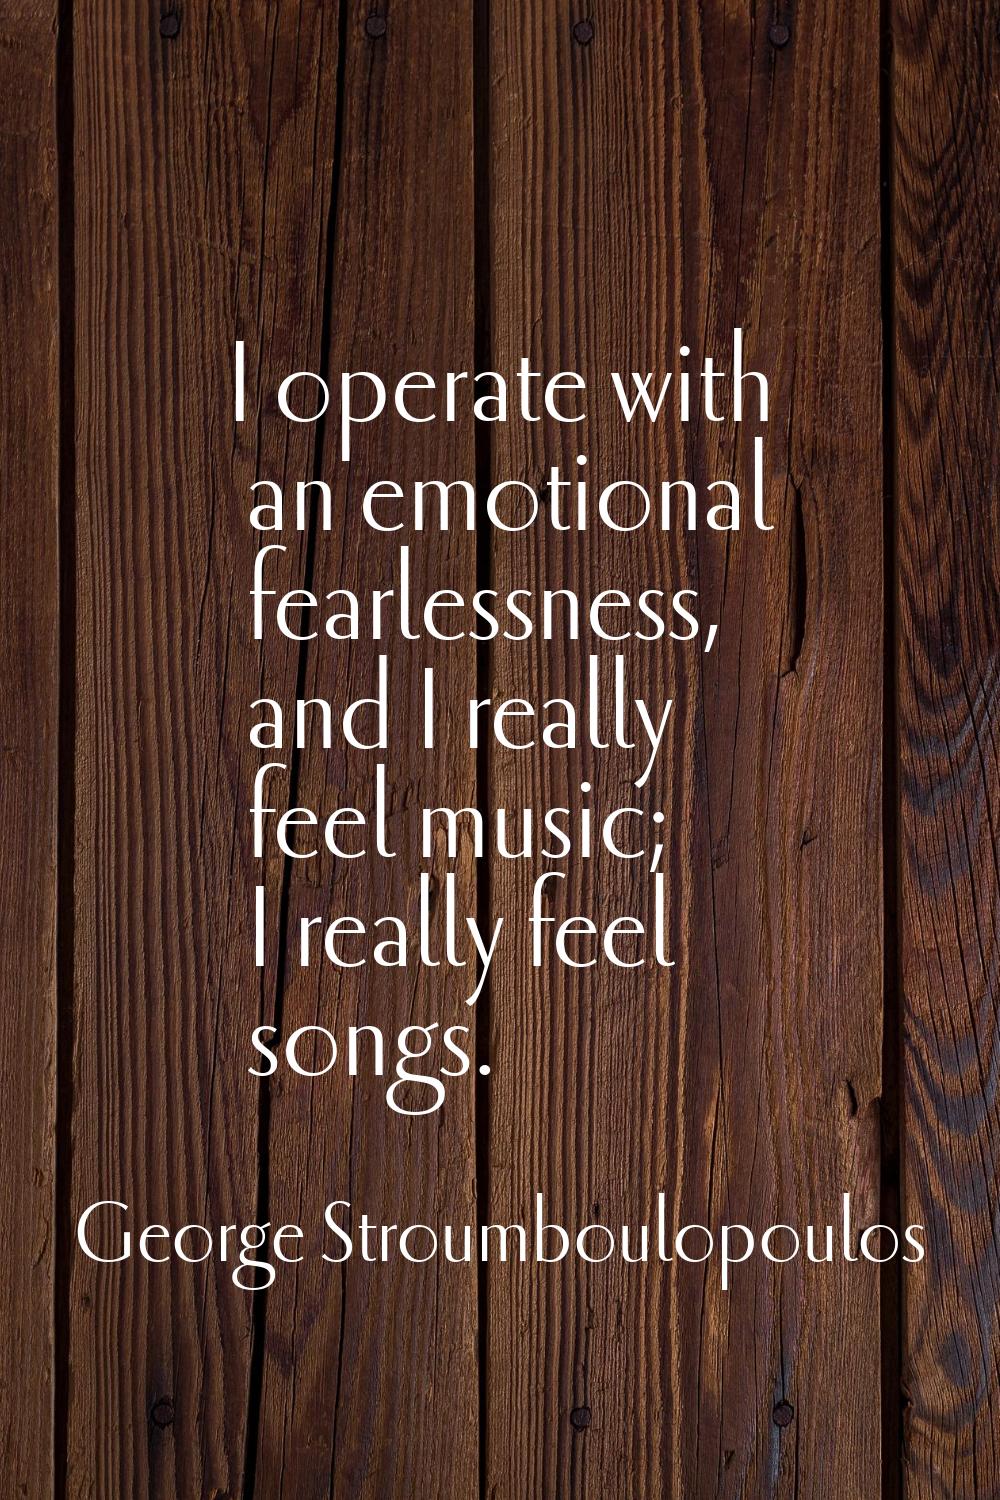 I operate with an emotional fearlessness, and I really feel music; I really feel songs.